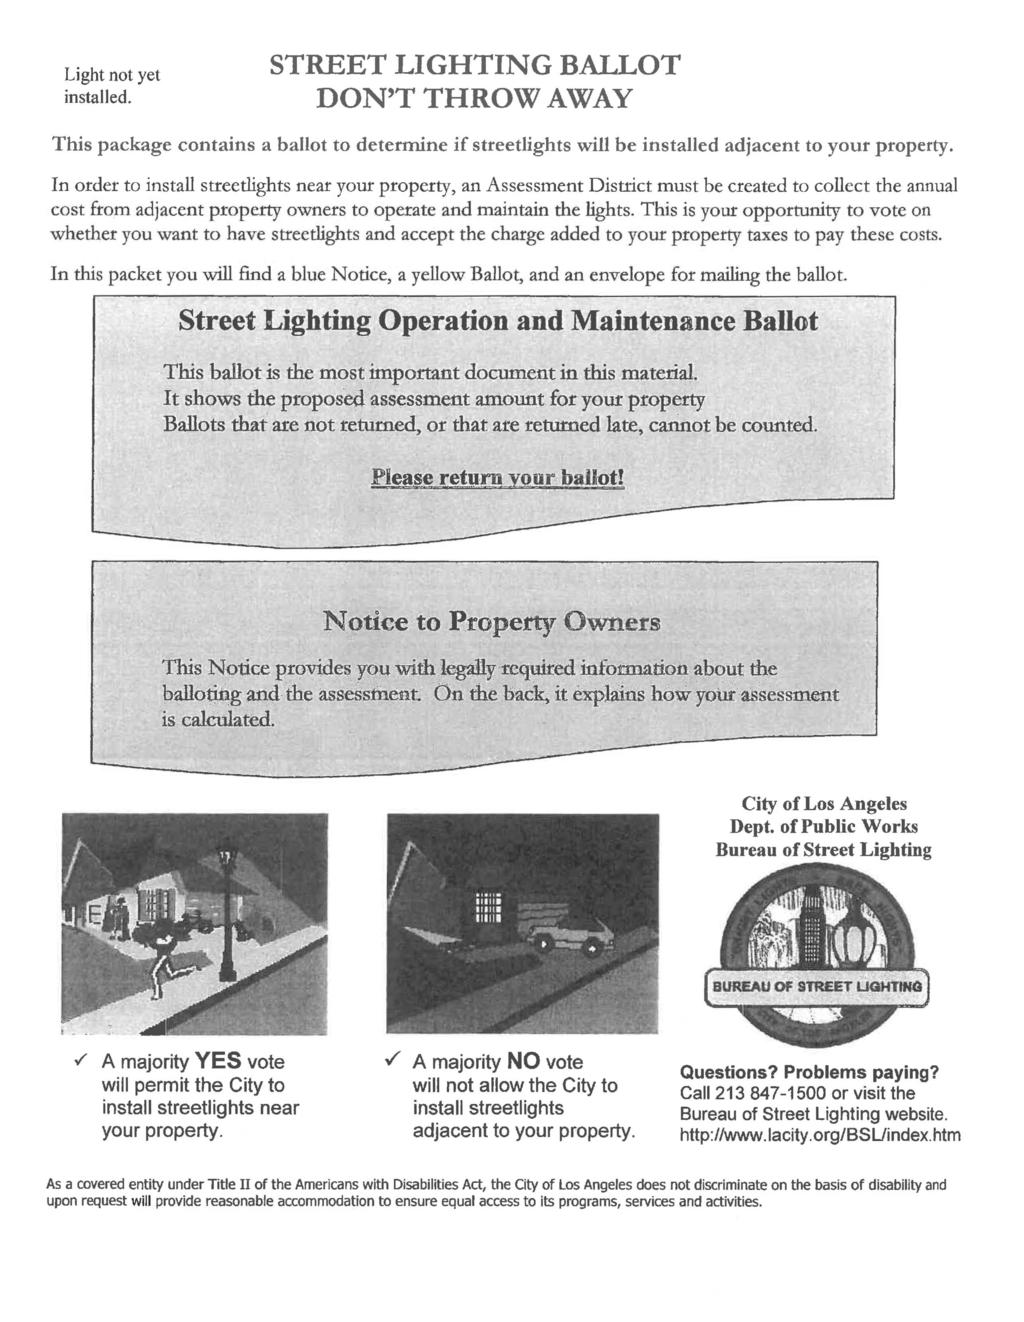 Light not yet installed. STREET LIGHTING BALLOT DON'T THROW AWAY This package contains a ballot to determine if streetlights will be installed adjacent to your property.